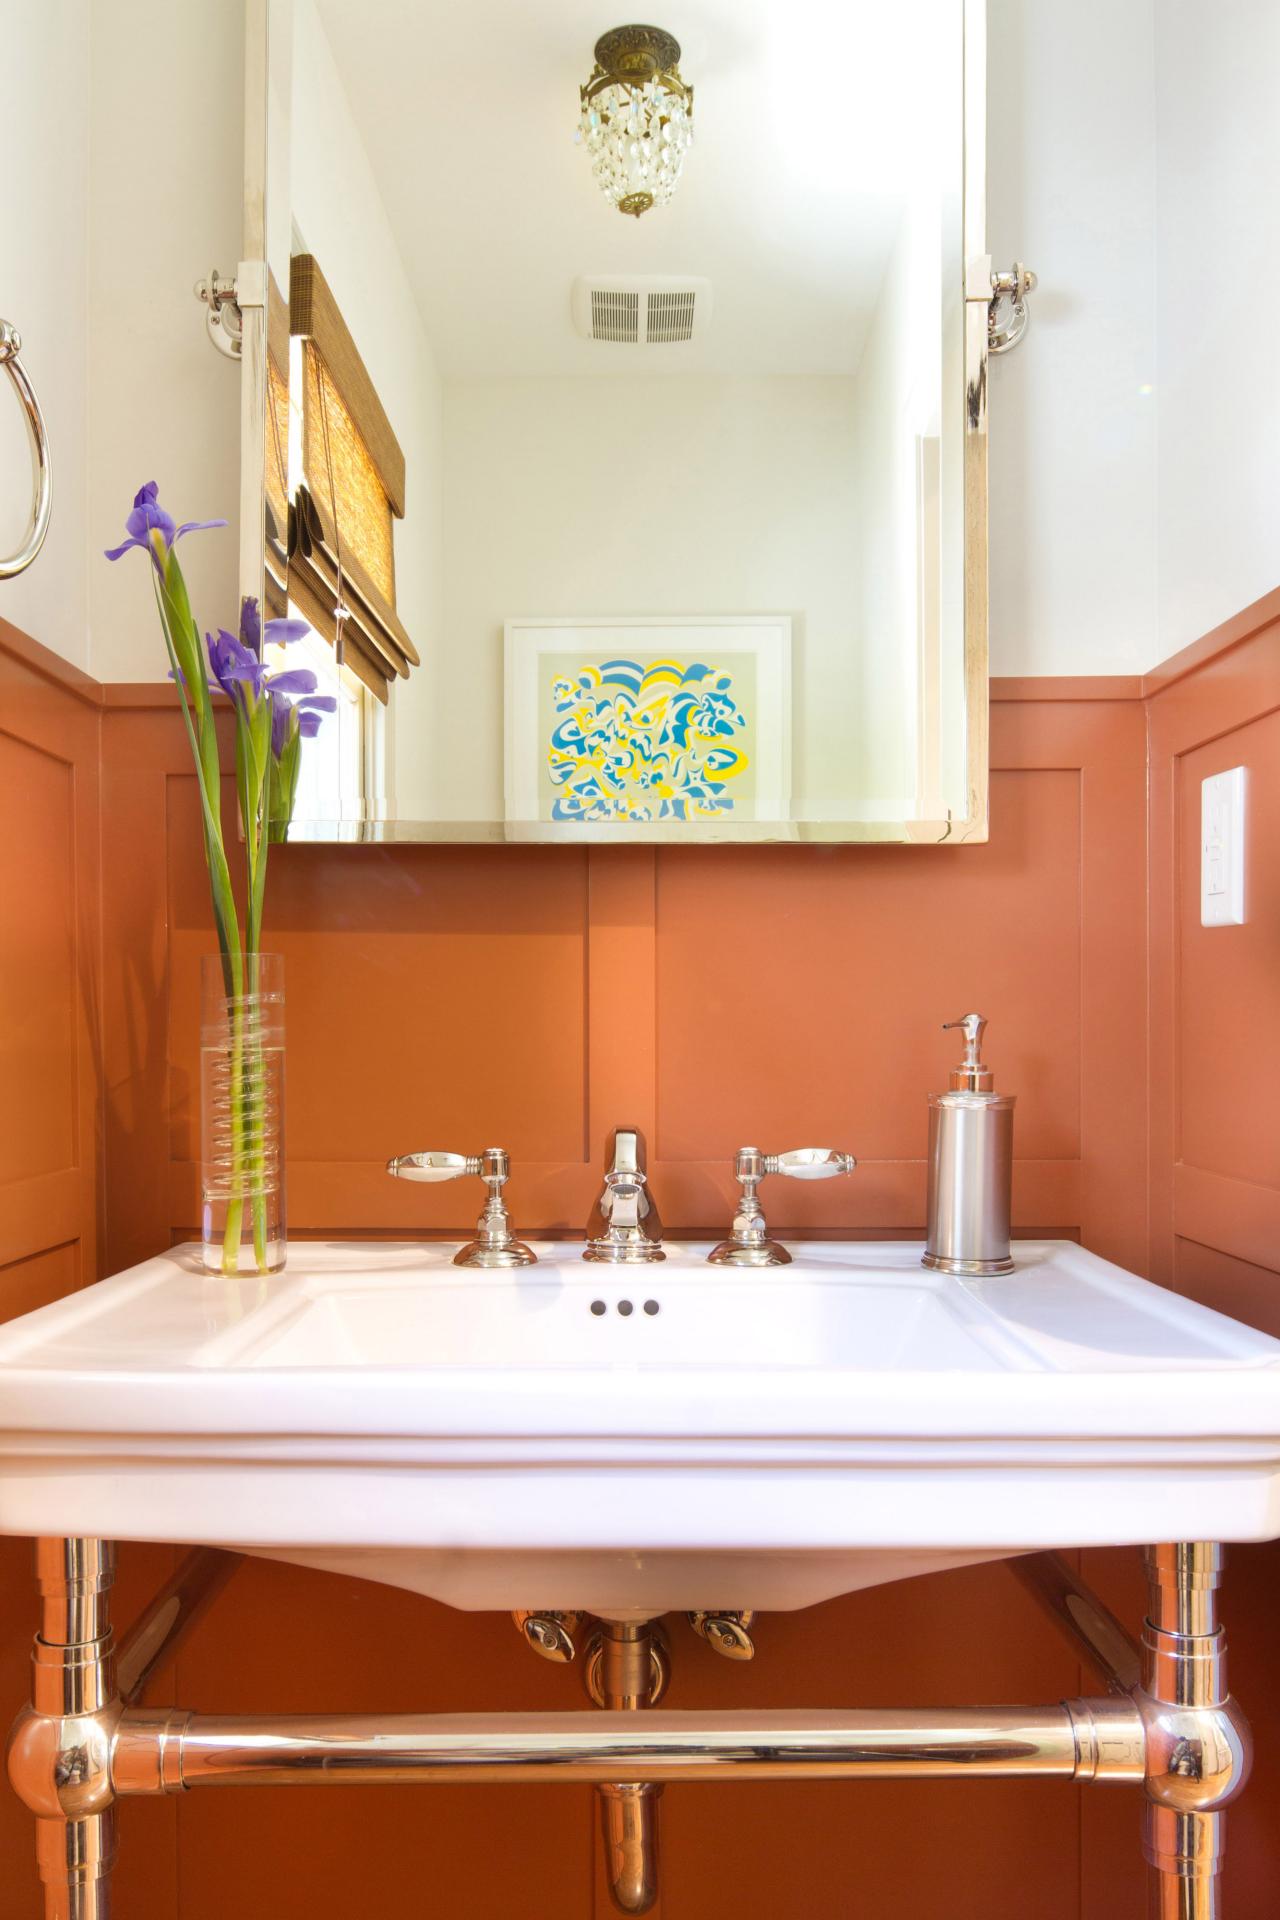 10 Paint Color Ideas for Small Bathrooms | DIY Network ...